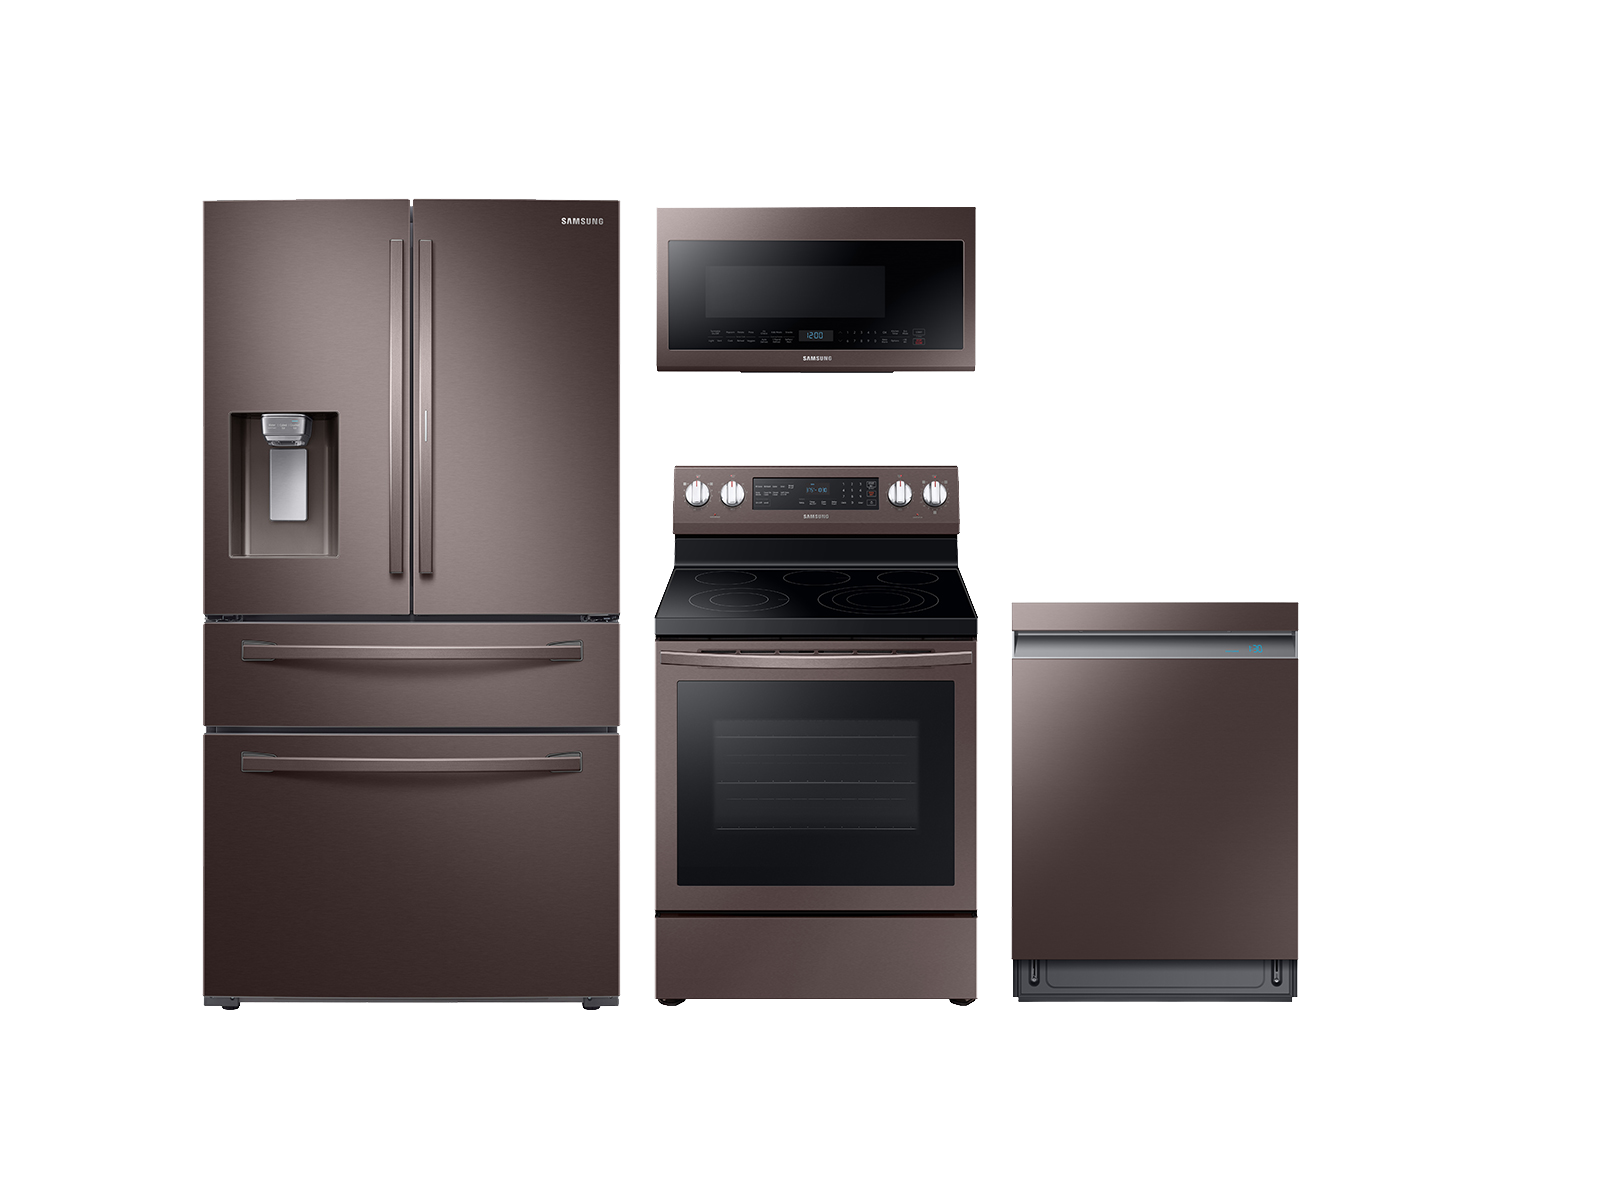 4-door Refrigerator + Electric Range + Linear Wash Dishwasher + Microwave Kitchen Package in Tuscan  Stainless